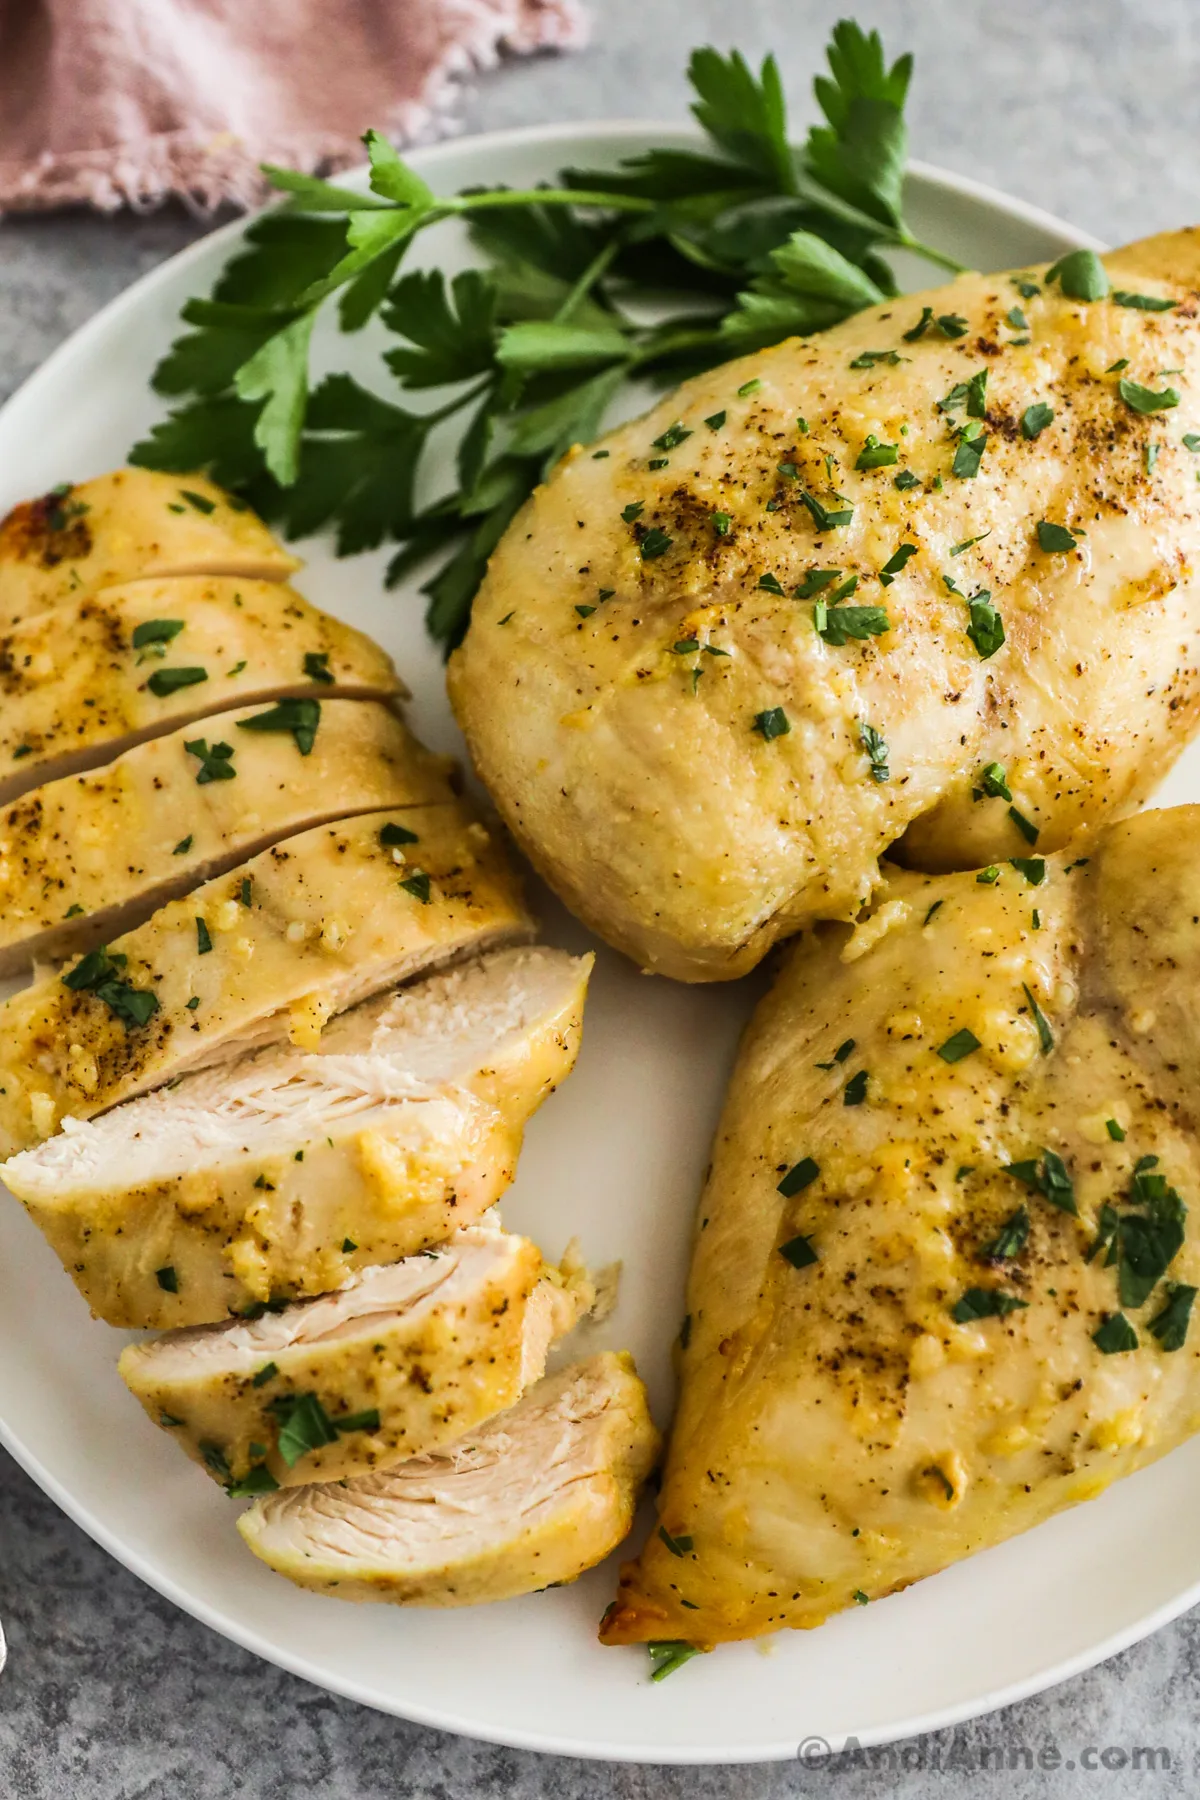 Three honey mustard chicken breasts on a plate, one sliced.